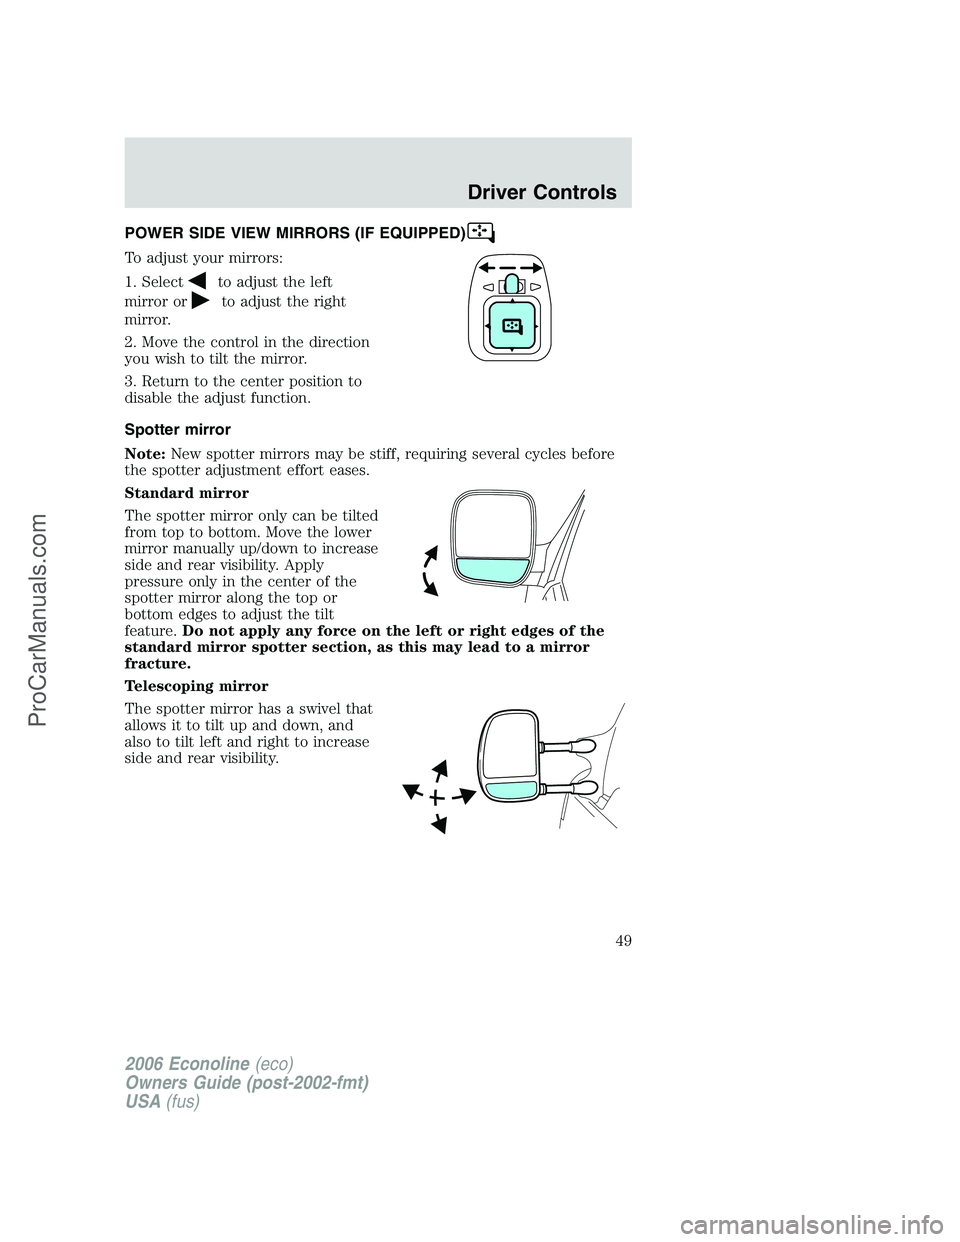 FORD E-150 2006 Service Manual POWER SIDE VIEW MIRRORS (IF EQUIPPED)
To adjust your mirrors:
1. Select
to adjust the left
mirror or
to adjust the right
mirror.
2. Move the control in the direction
you wish to tilt the mirror.
3. Re